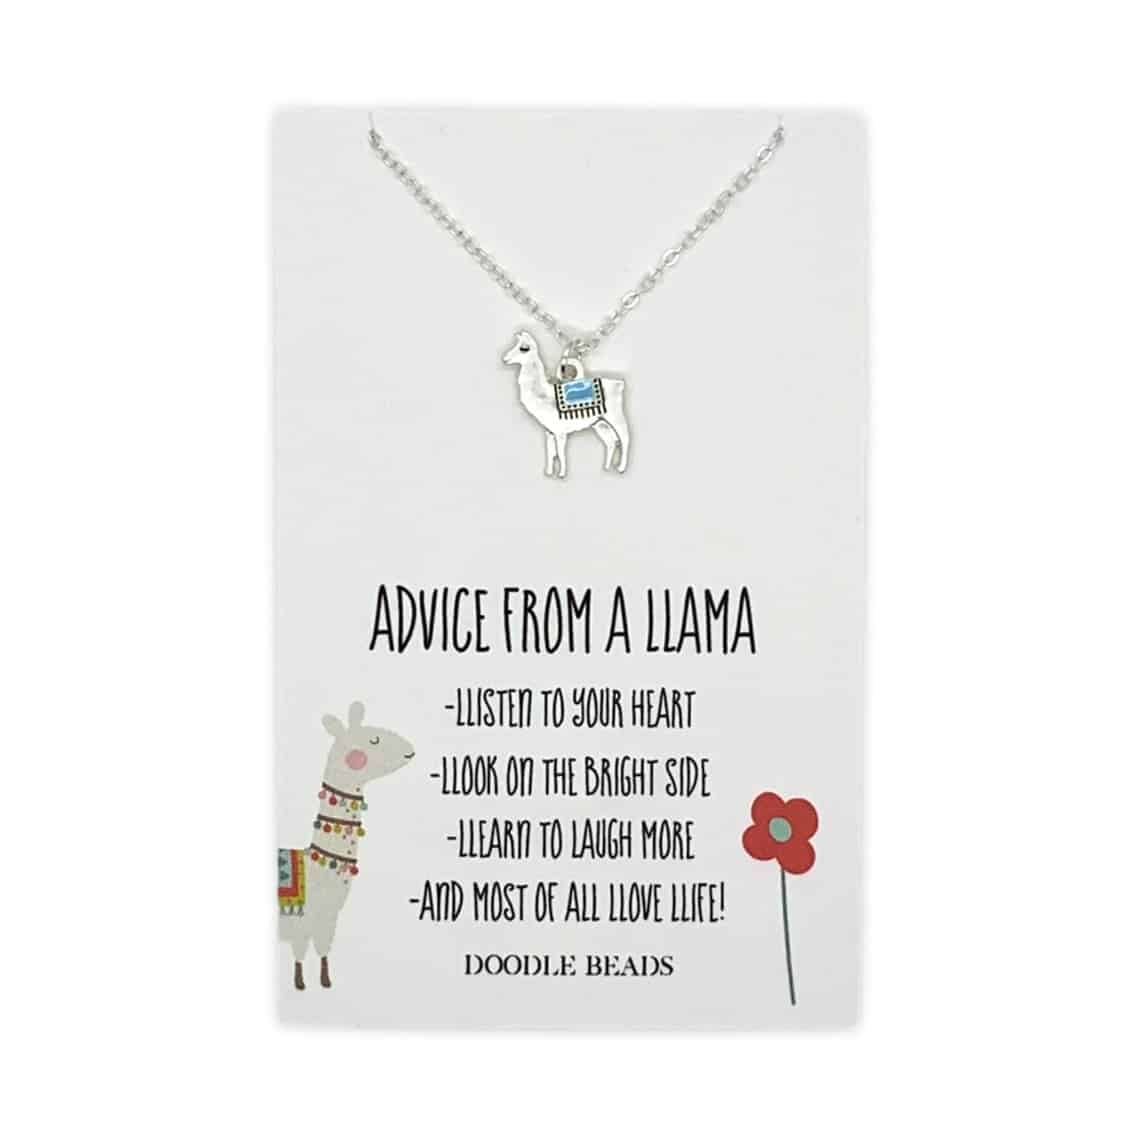 Quaint Necklace for the Llama-Hearted